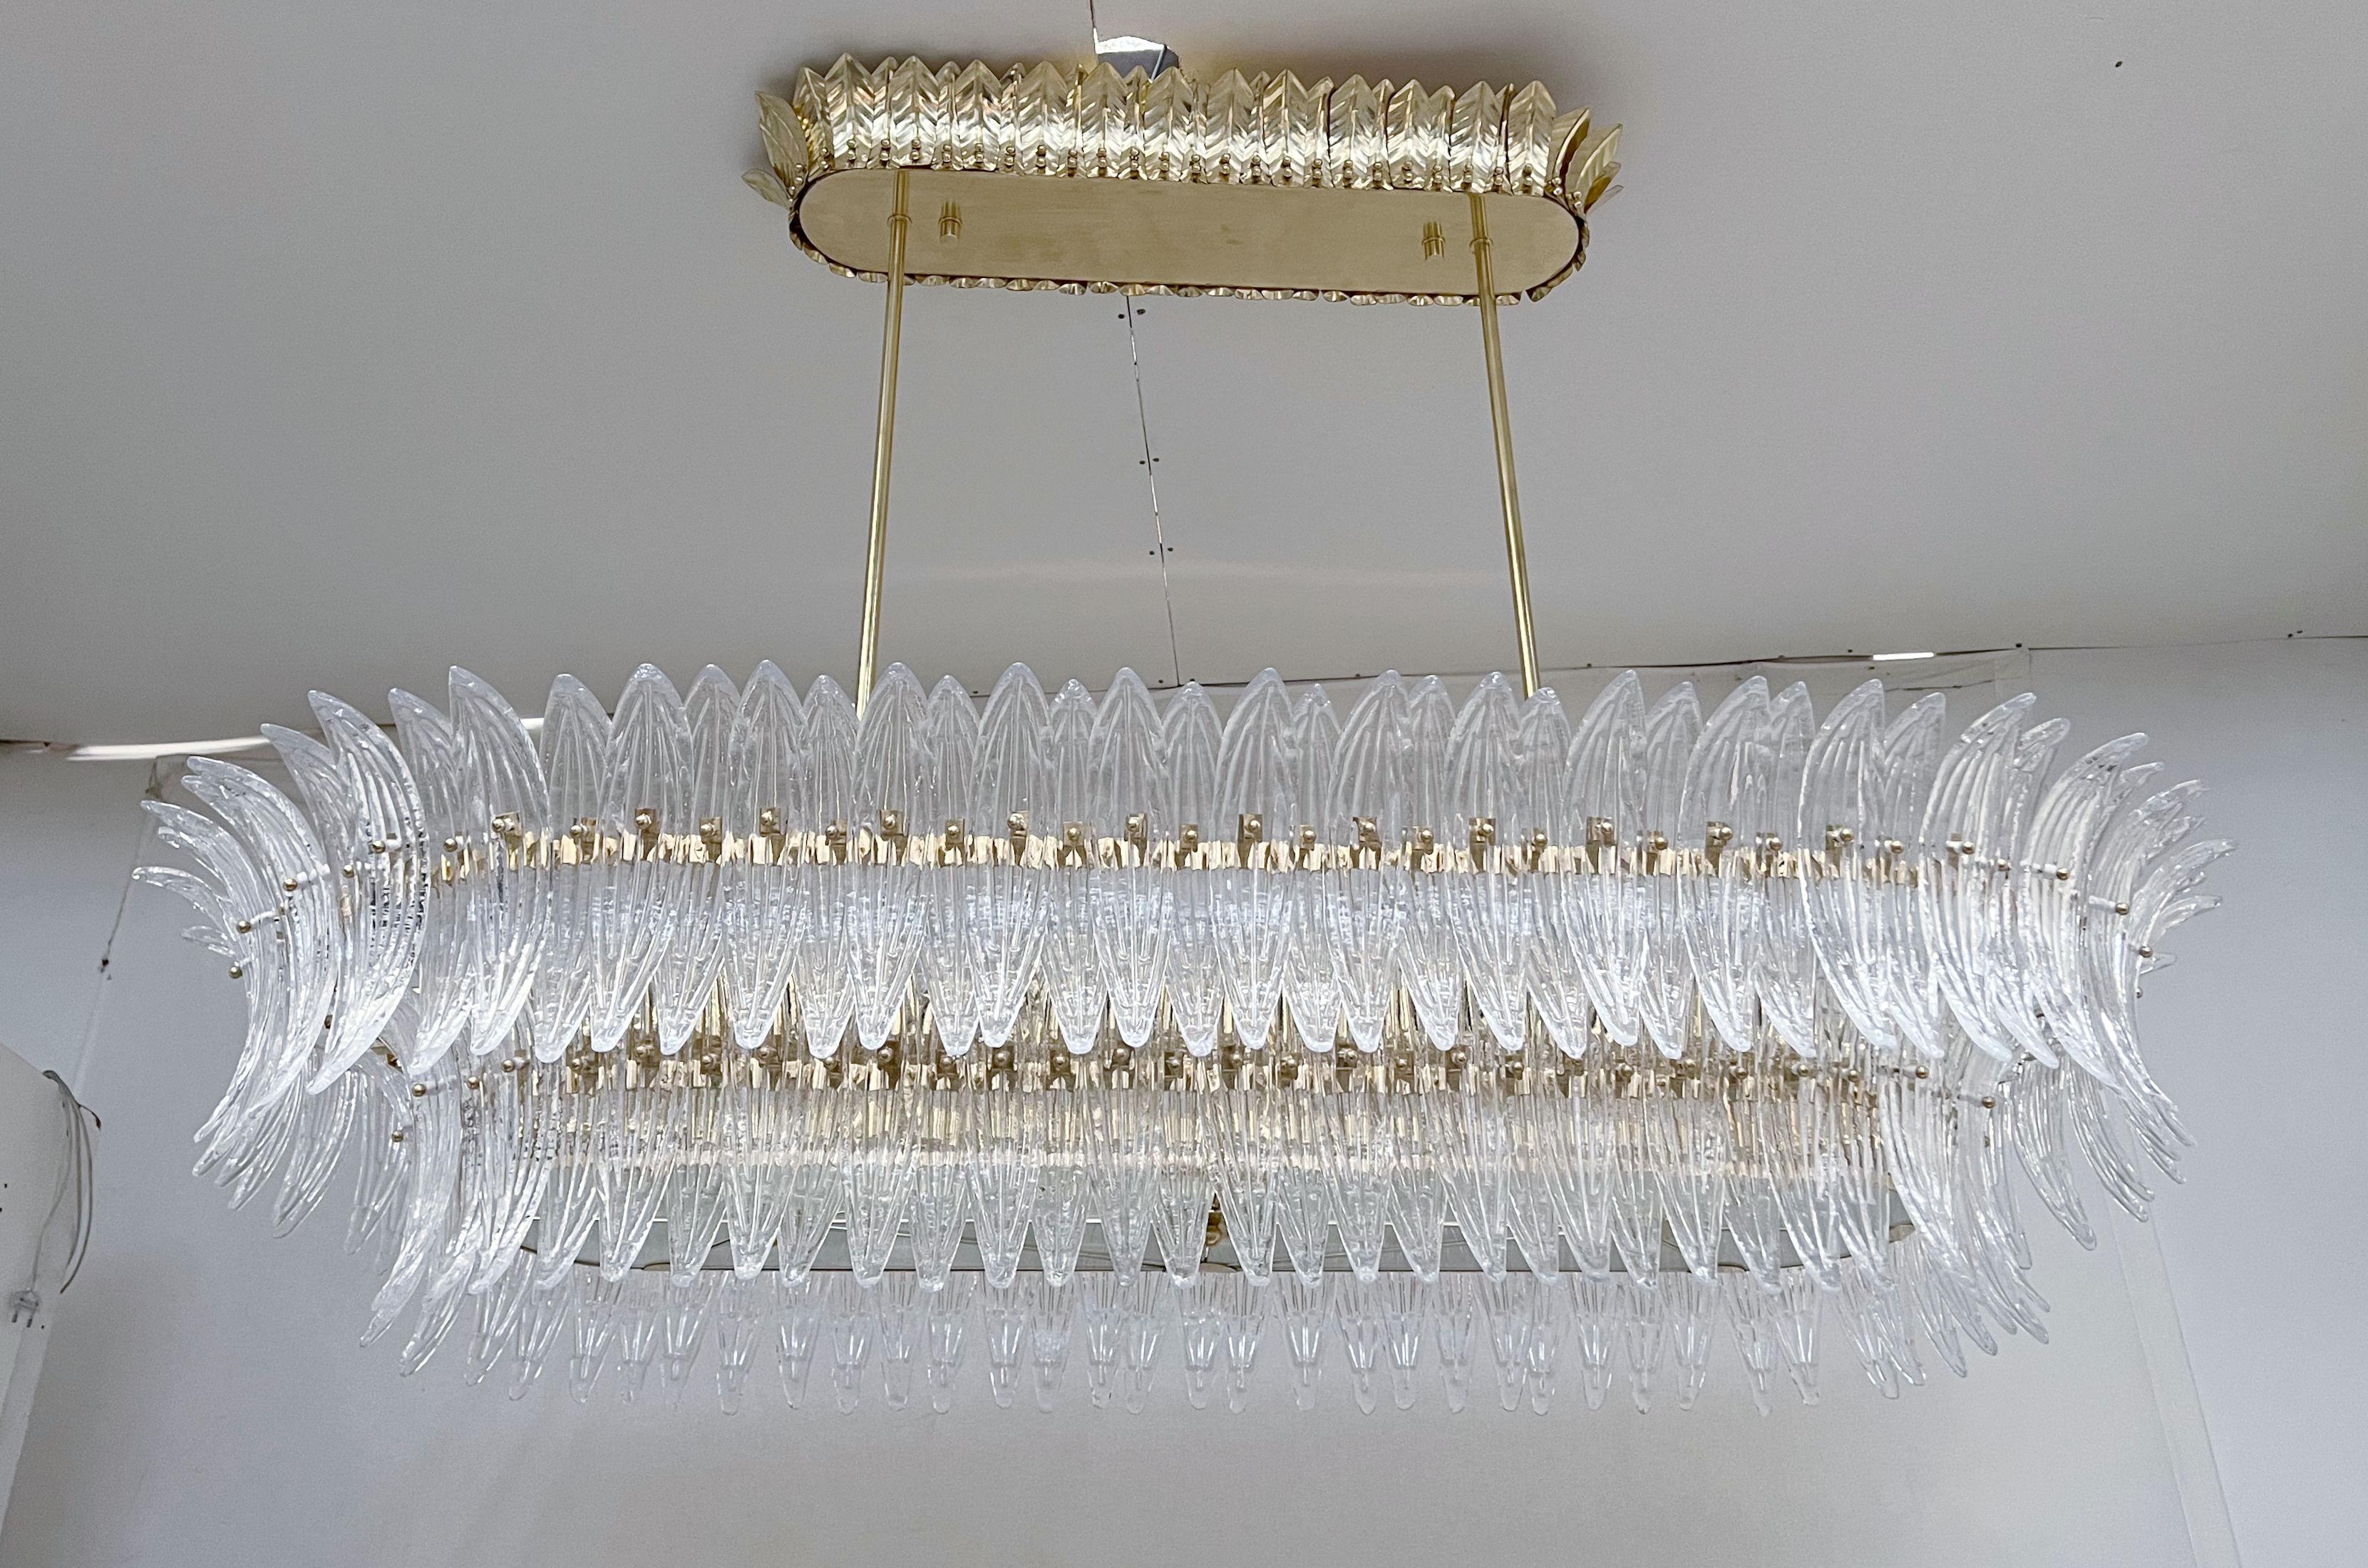 Italian Palmette chandelier shown in clear Murano glass leaves mounted on unlacquered natural brass finish frame with frosted bottom glass diffusers / Made in Italy
Length 66 inches, width 31.5 inches, height 13 inches, total height 48 inches